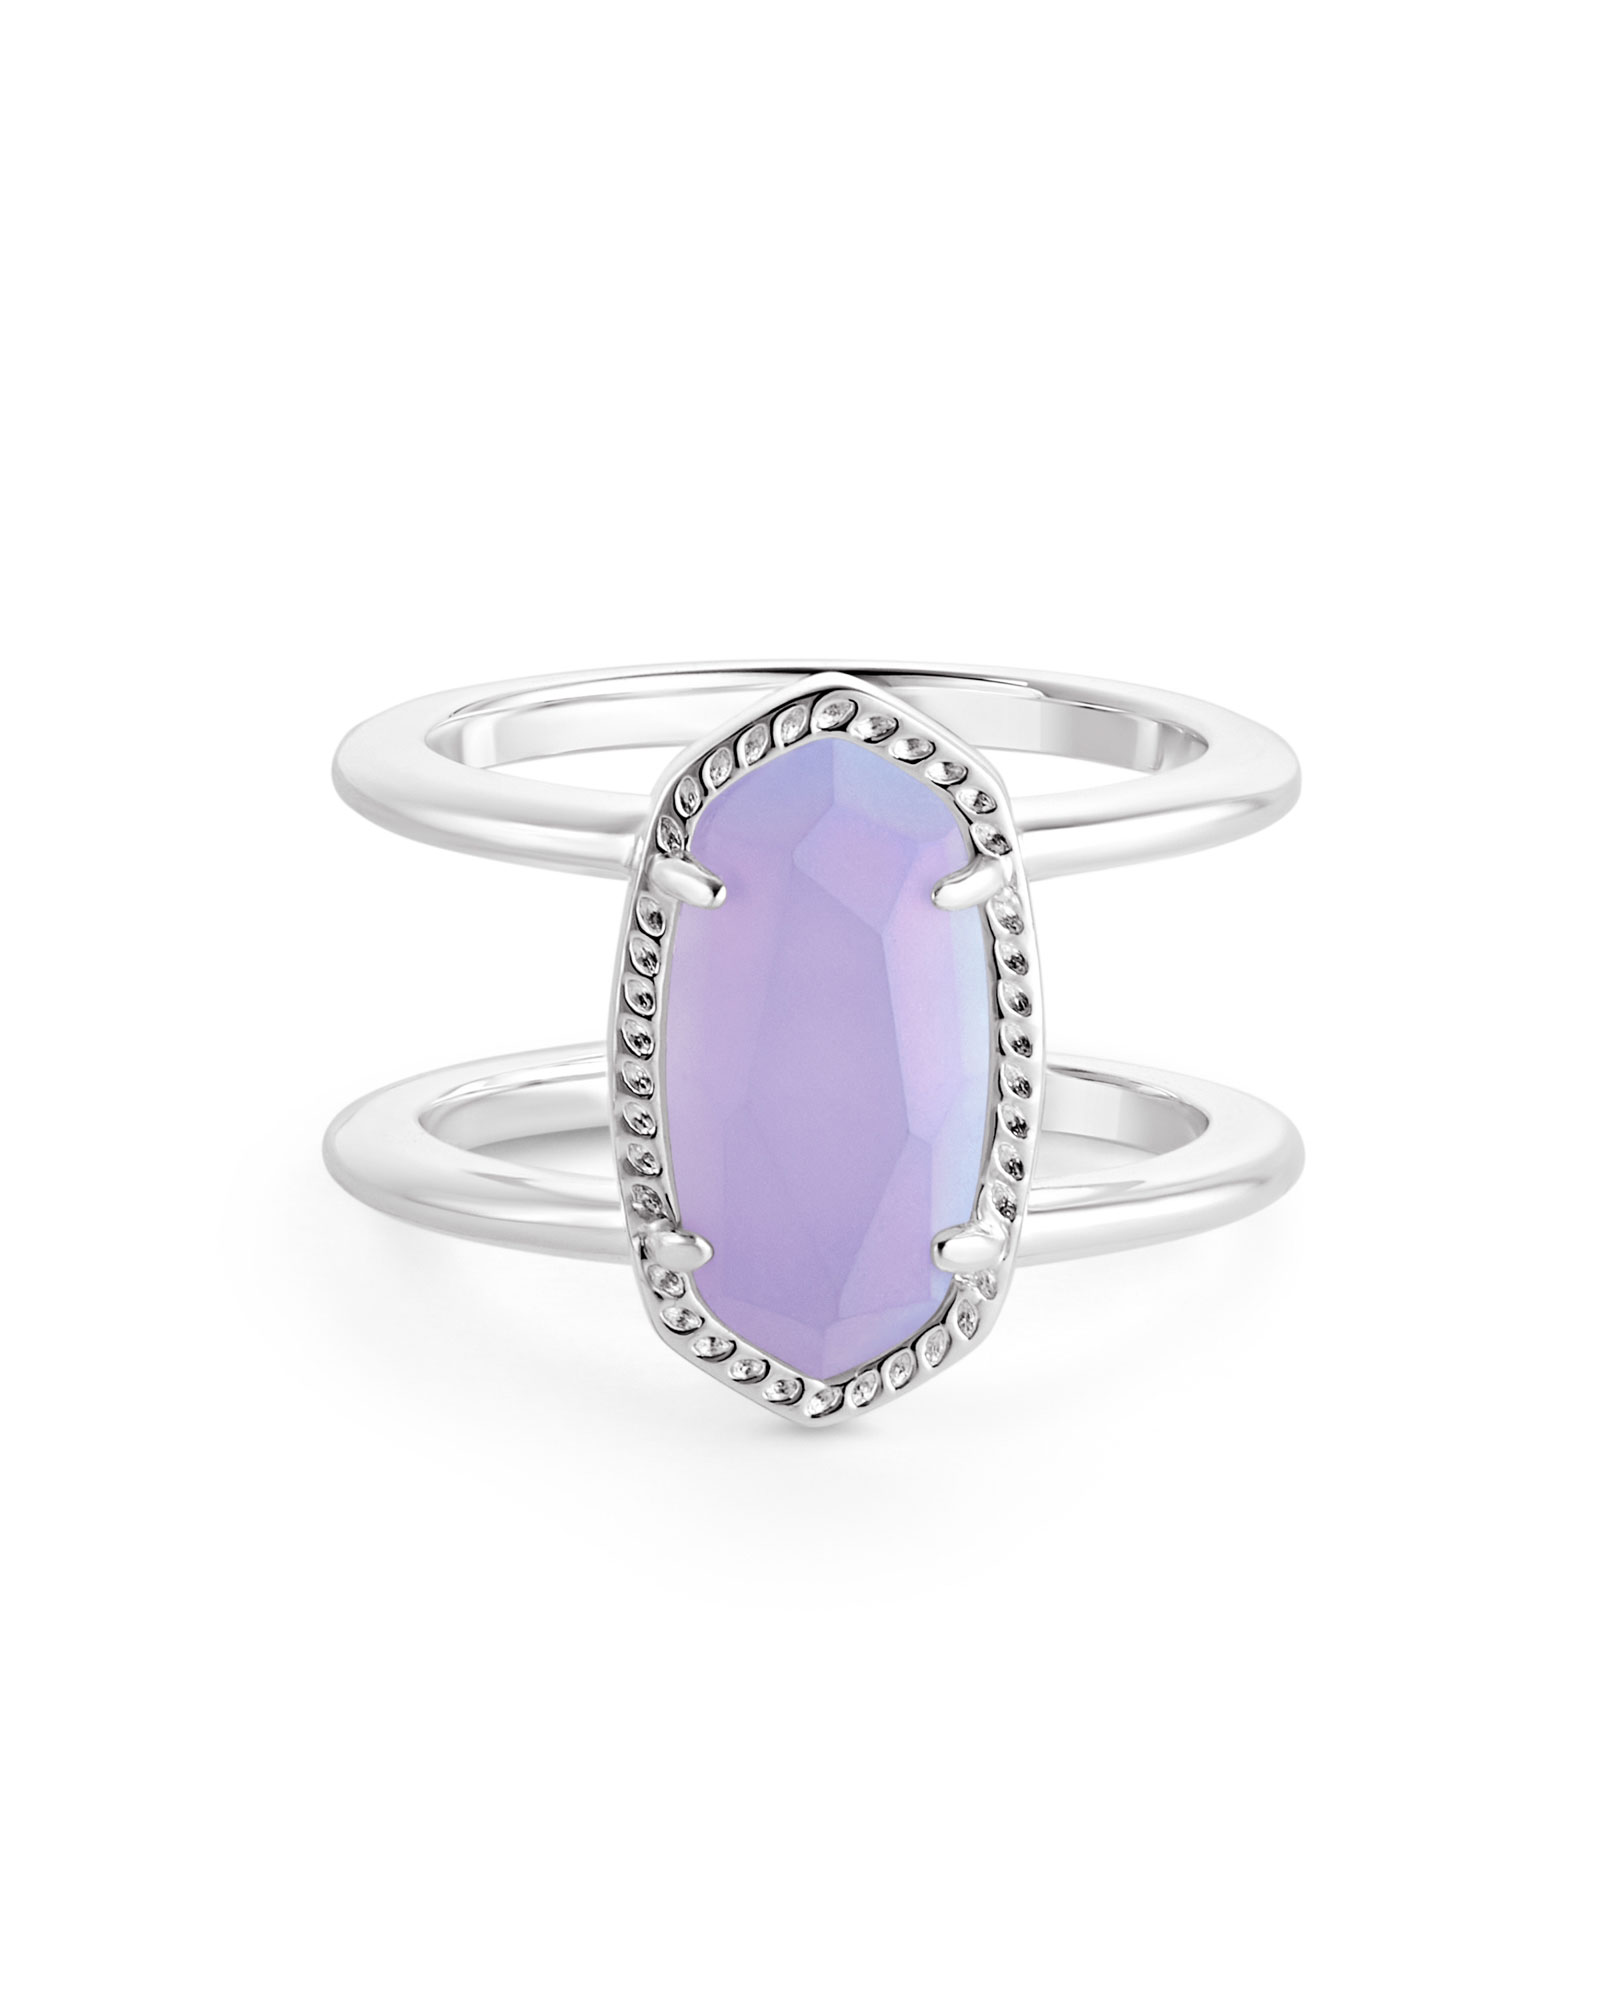 Elyse Double Band Ring in Matte Iridescent Lilac Glass | Kendra Scott